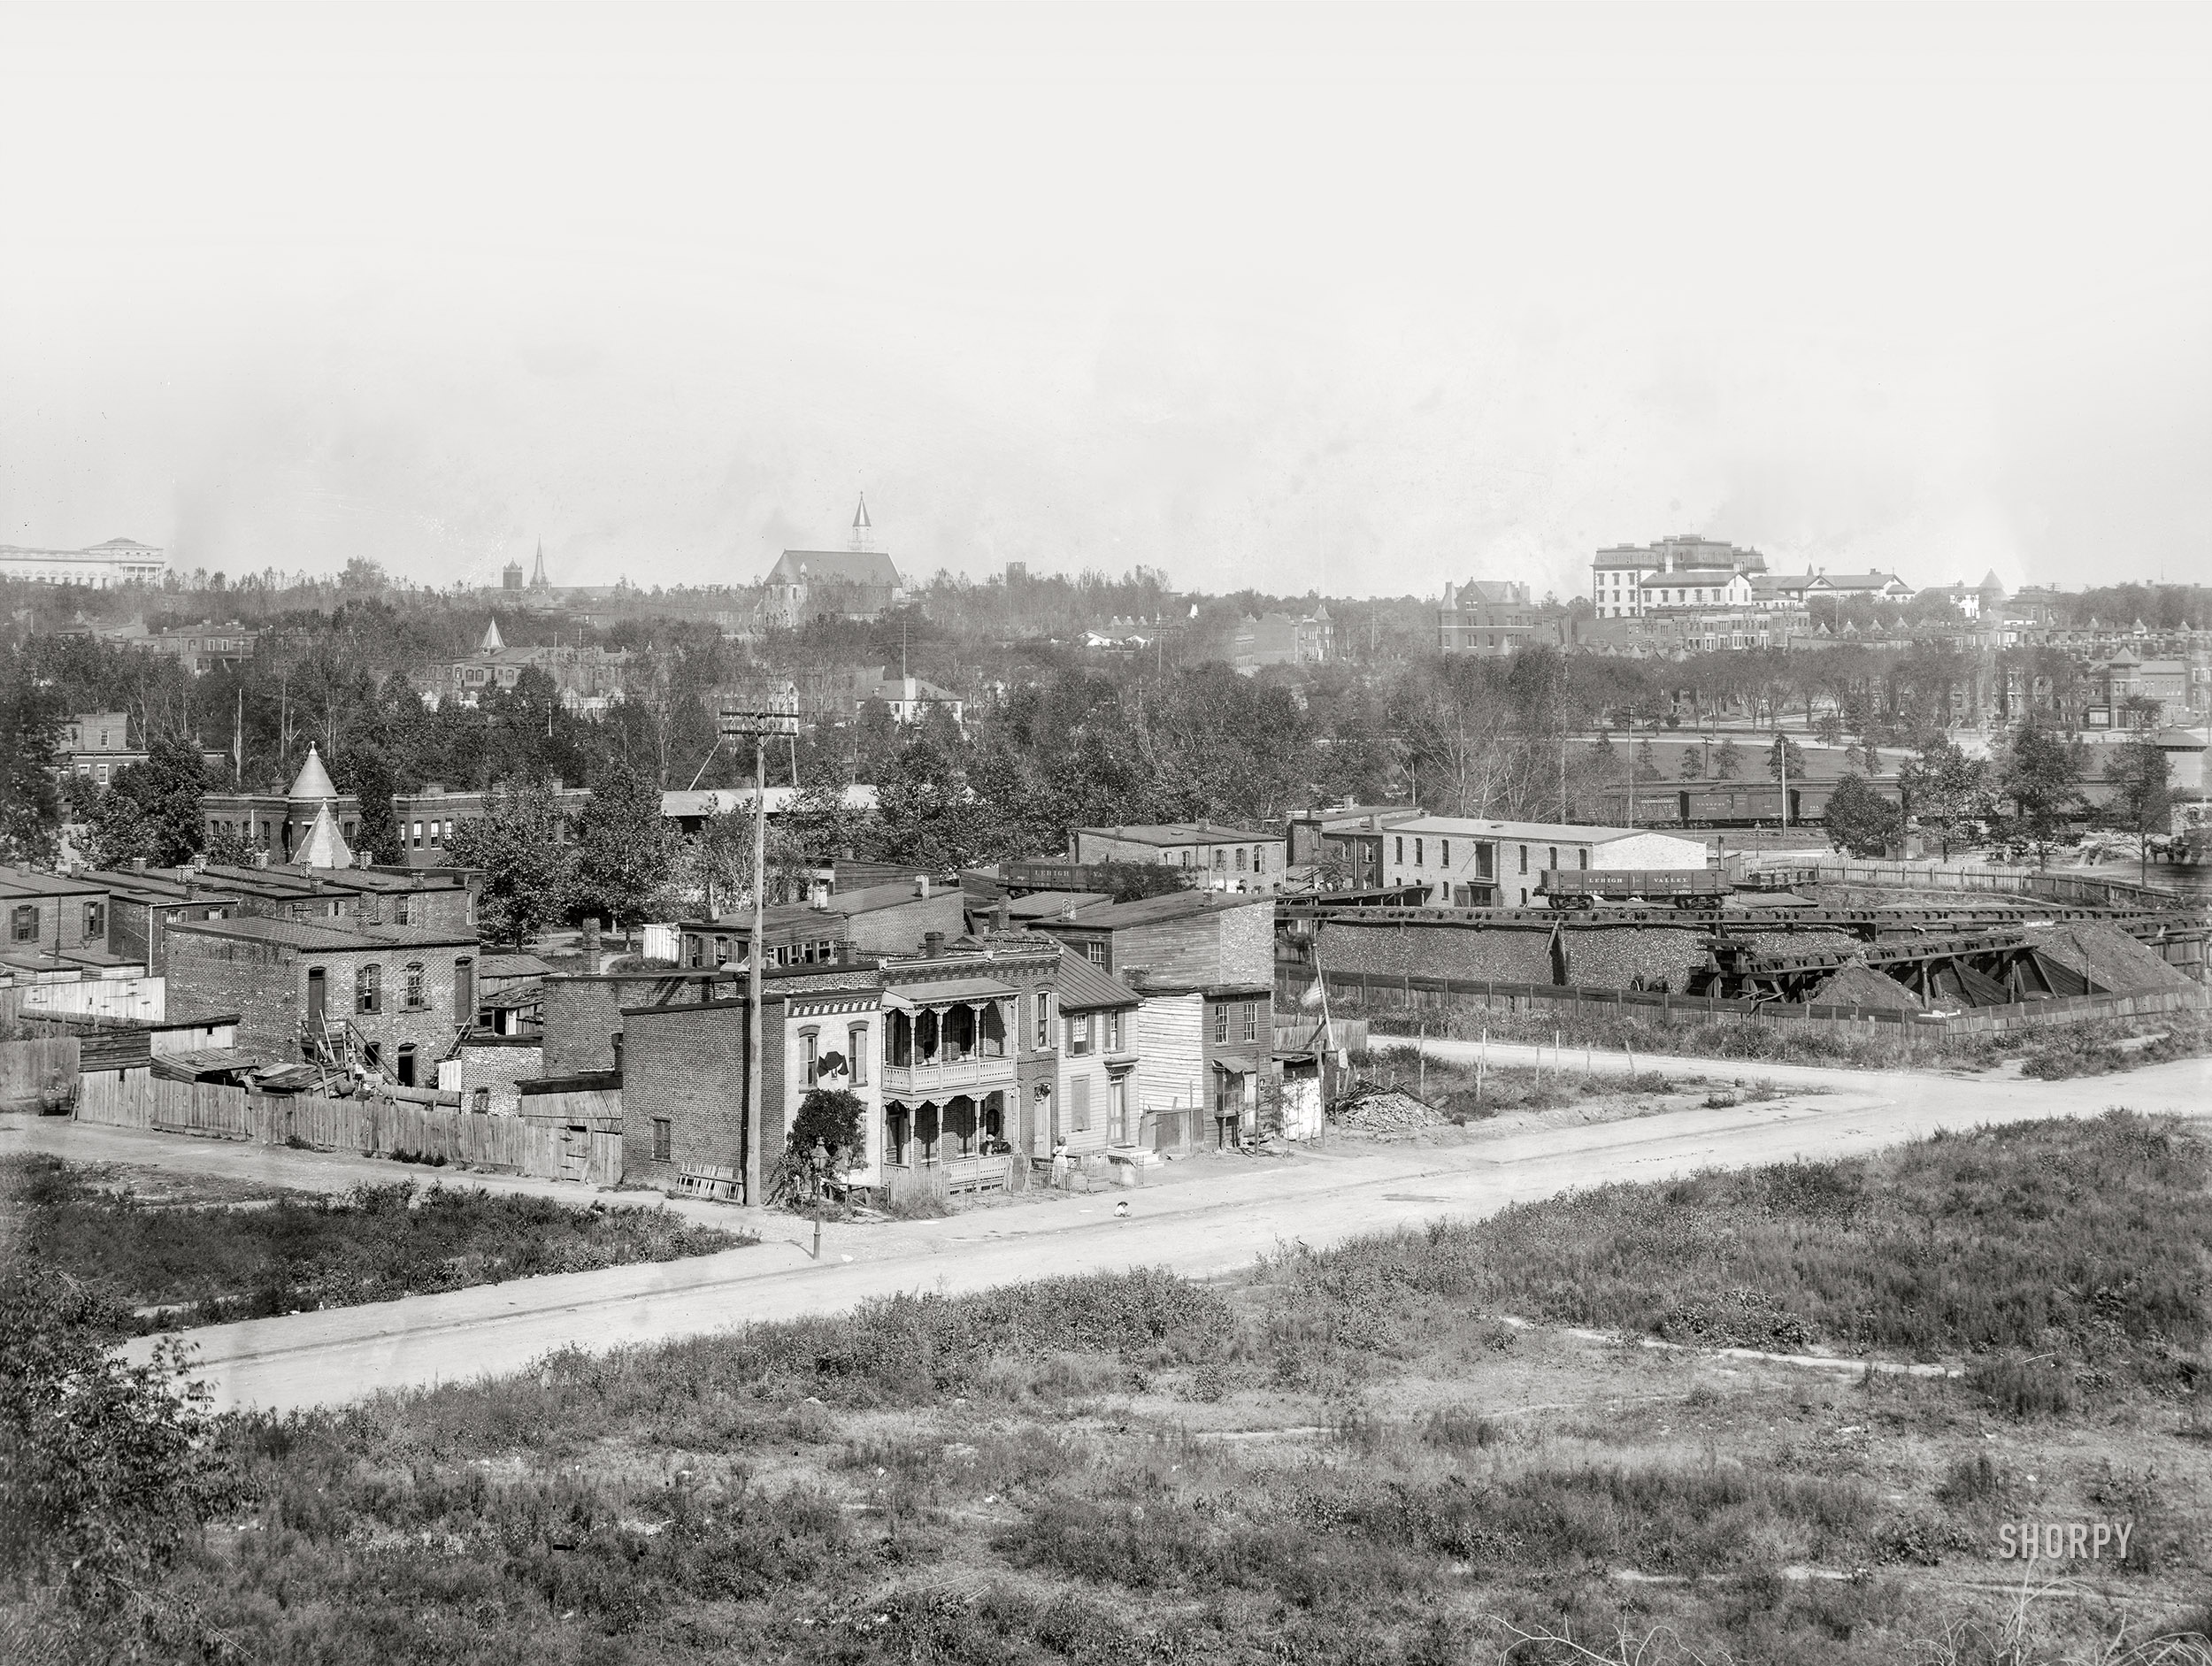 Washington, D.C. "View from Randall School of H Street S.W., between Half & First Streets, in 1901 showing coal yard and old homes near railroad station. Houses have McKinley memorials. Portrait of President William McKinley draped in black is visible on the house on the left. A flag is at half mast on the right." Along with at least two other McKinley portraits. 8x10 inch glass negative, D.C. Street Survey Collection. View full size.